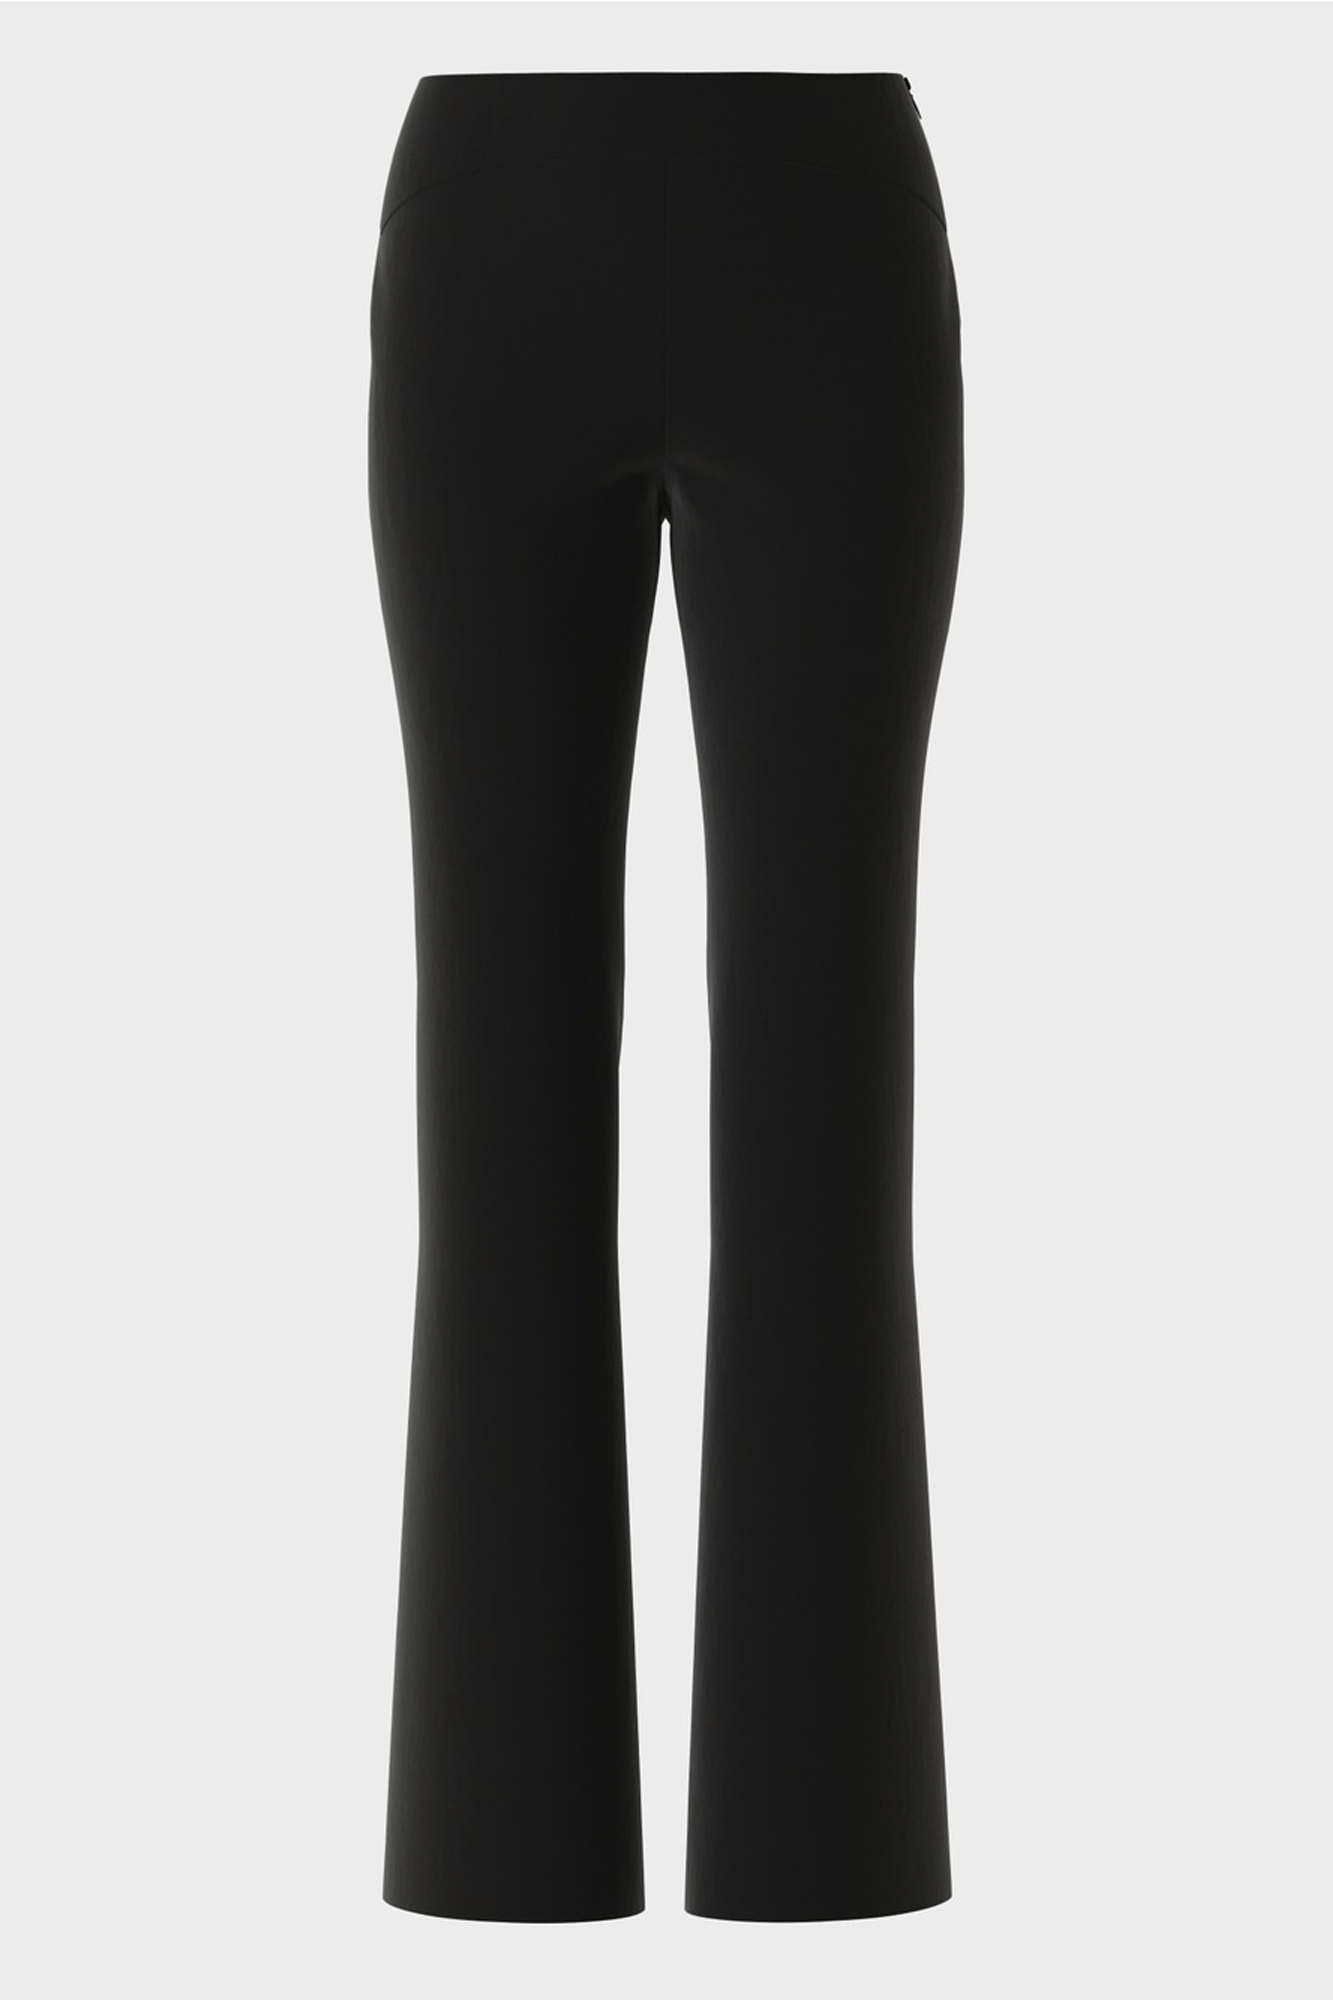 Fuyu's Timeless Blooms pants from Marc Cain add an edgy seventies silhouette to your wardrobe. Crafted with a fitted waist and hip, widening towards the ankle, this fashionable piece offers a flattering shape with no fastener and decorative welt pockets at the back. Perfect for any wardrobe.